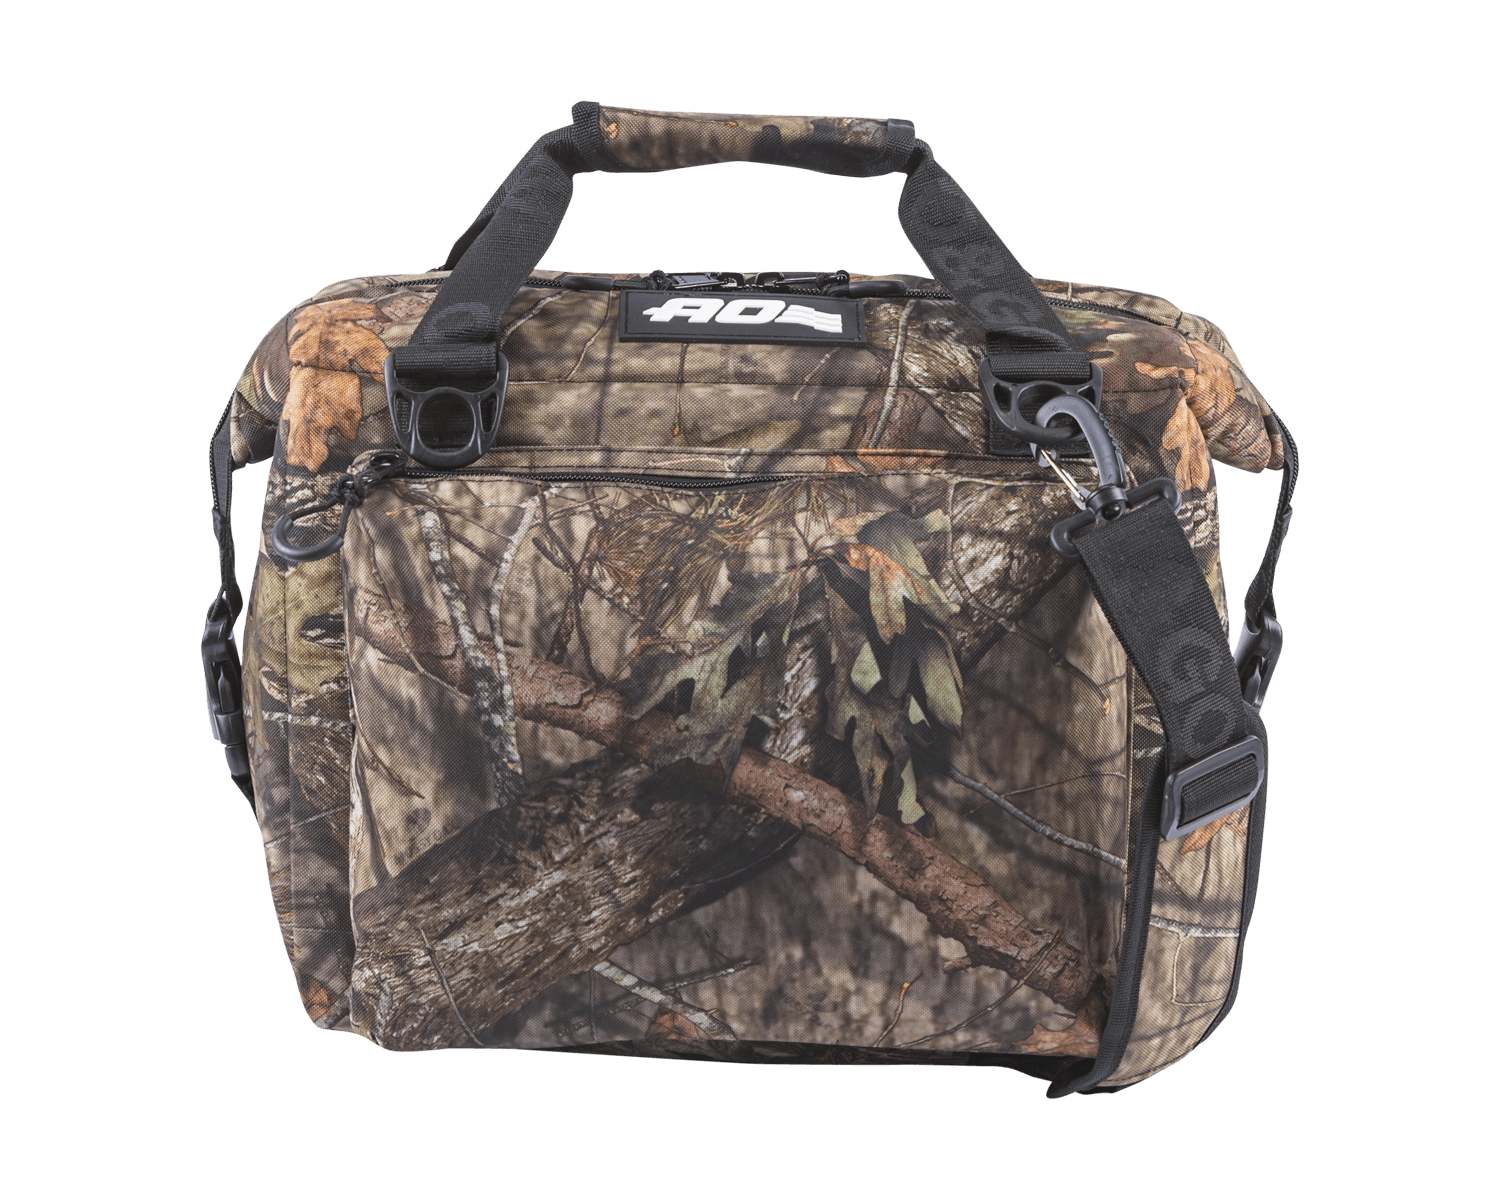 Mossy Oak Break-Up Country Series Deluxe Cooler – AO Coolers